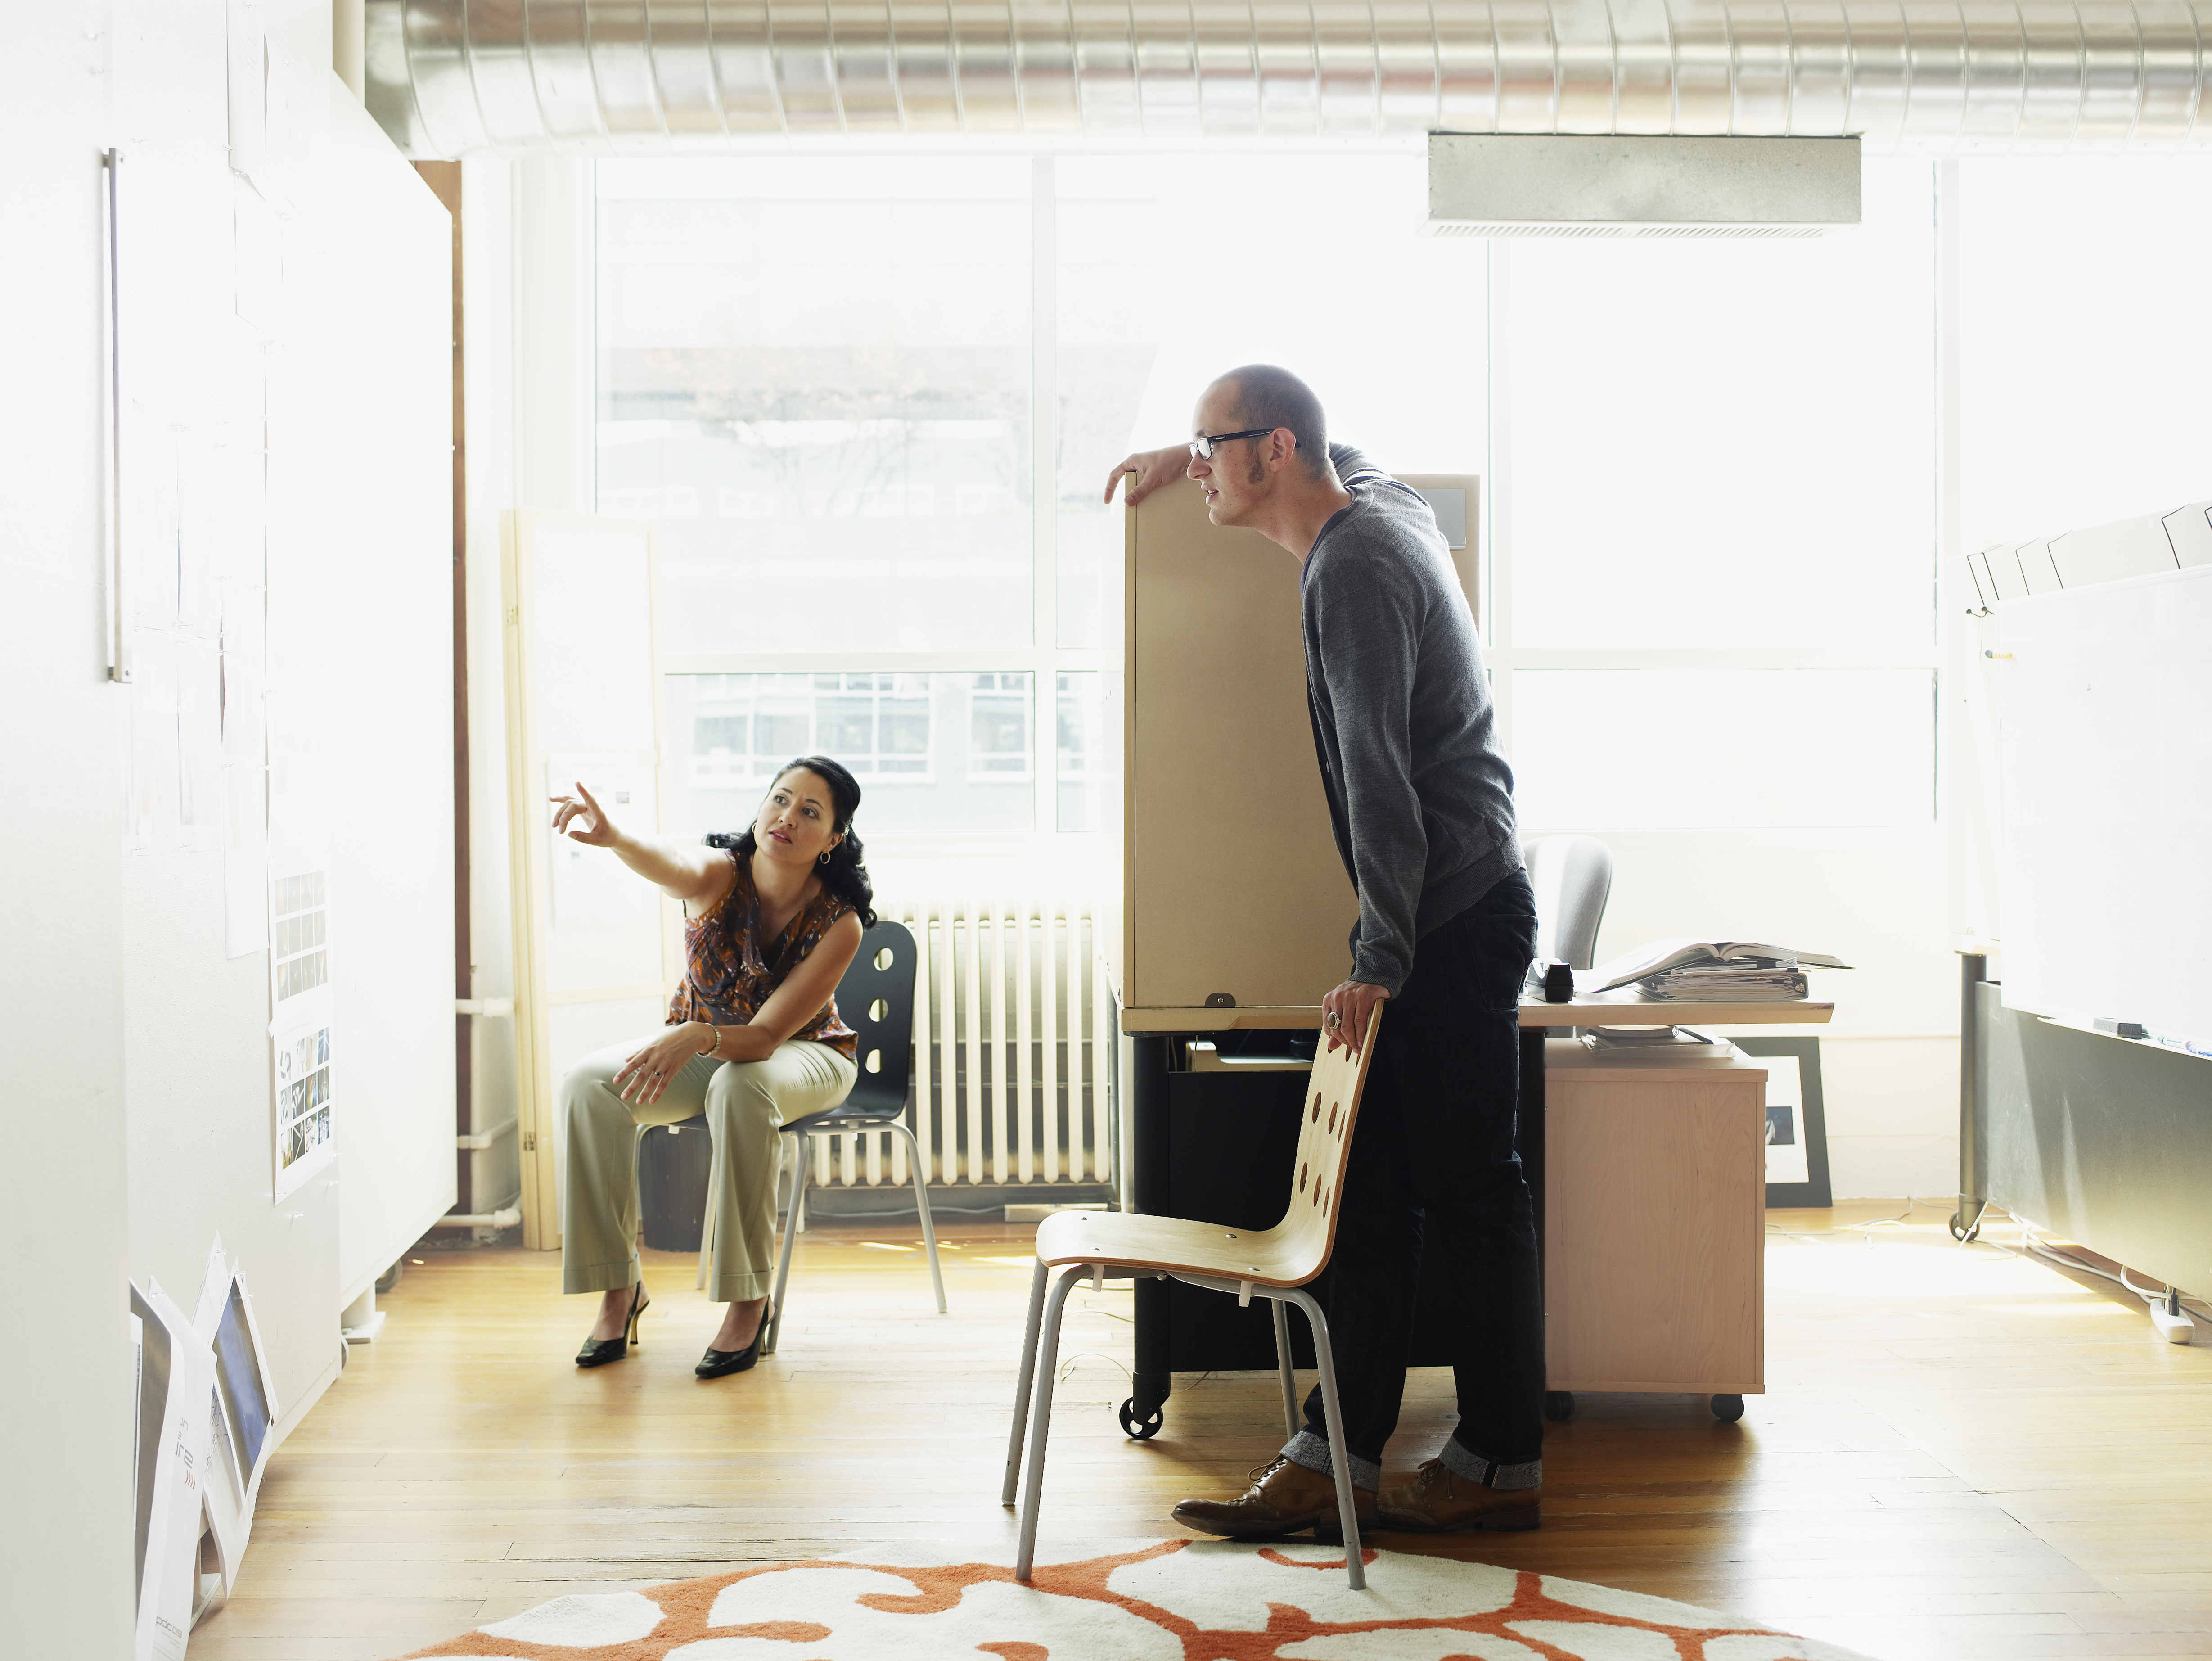 man and woman in office, woman pointing out details on whiteboard to man 